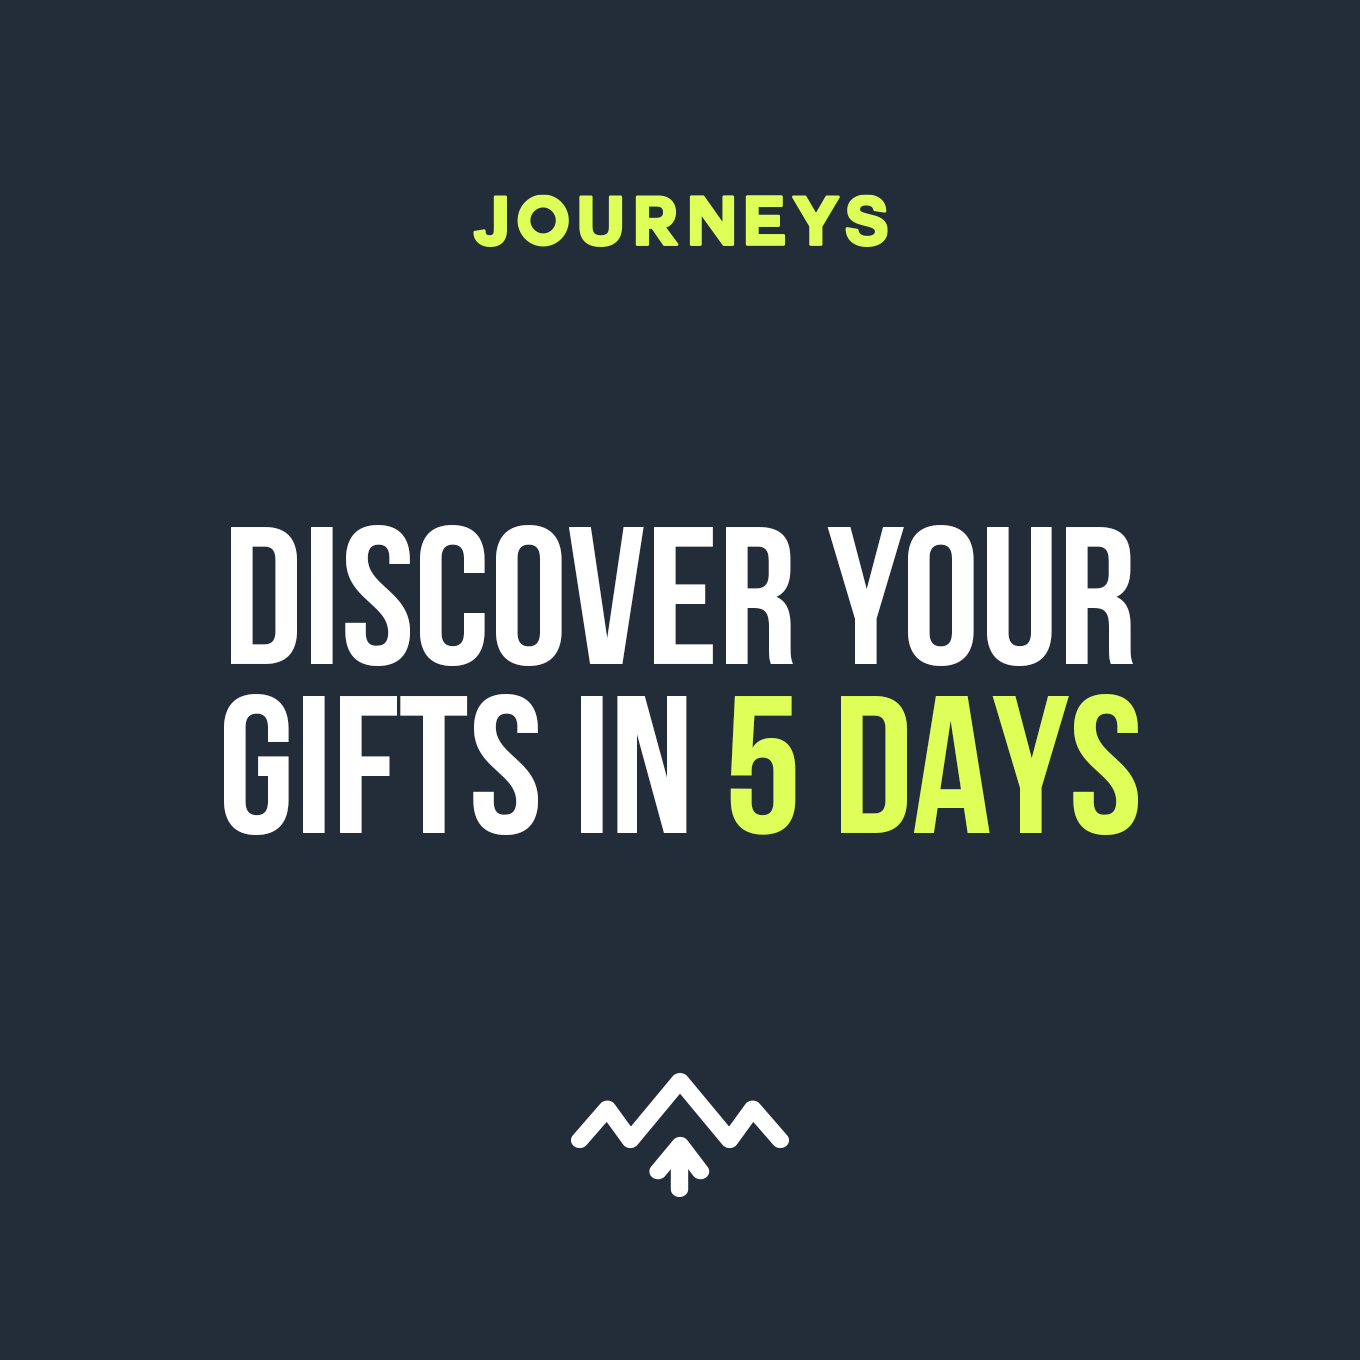 Discover Your Gifts in 5 Days